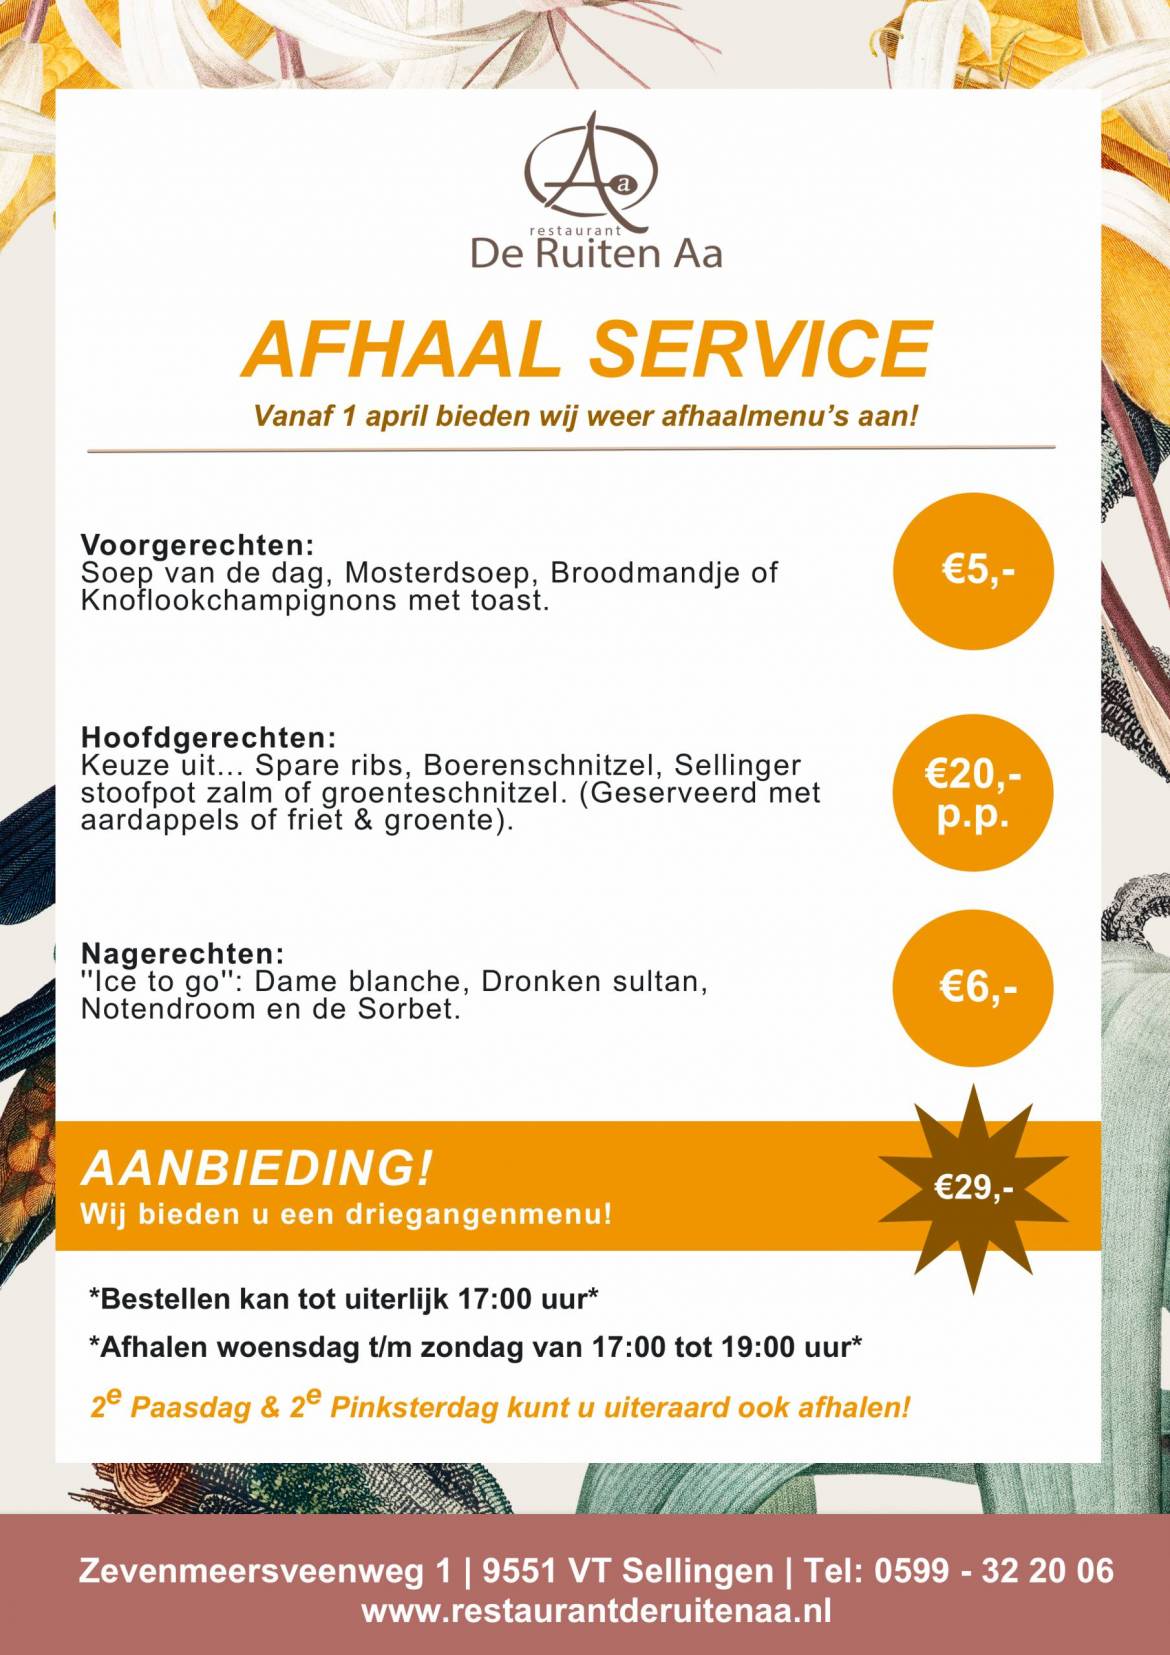 afhaal-service-ruiten-aa-scaled.jpg